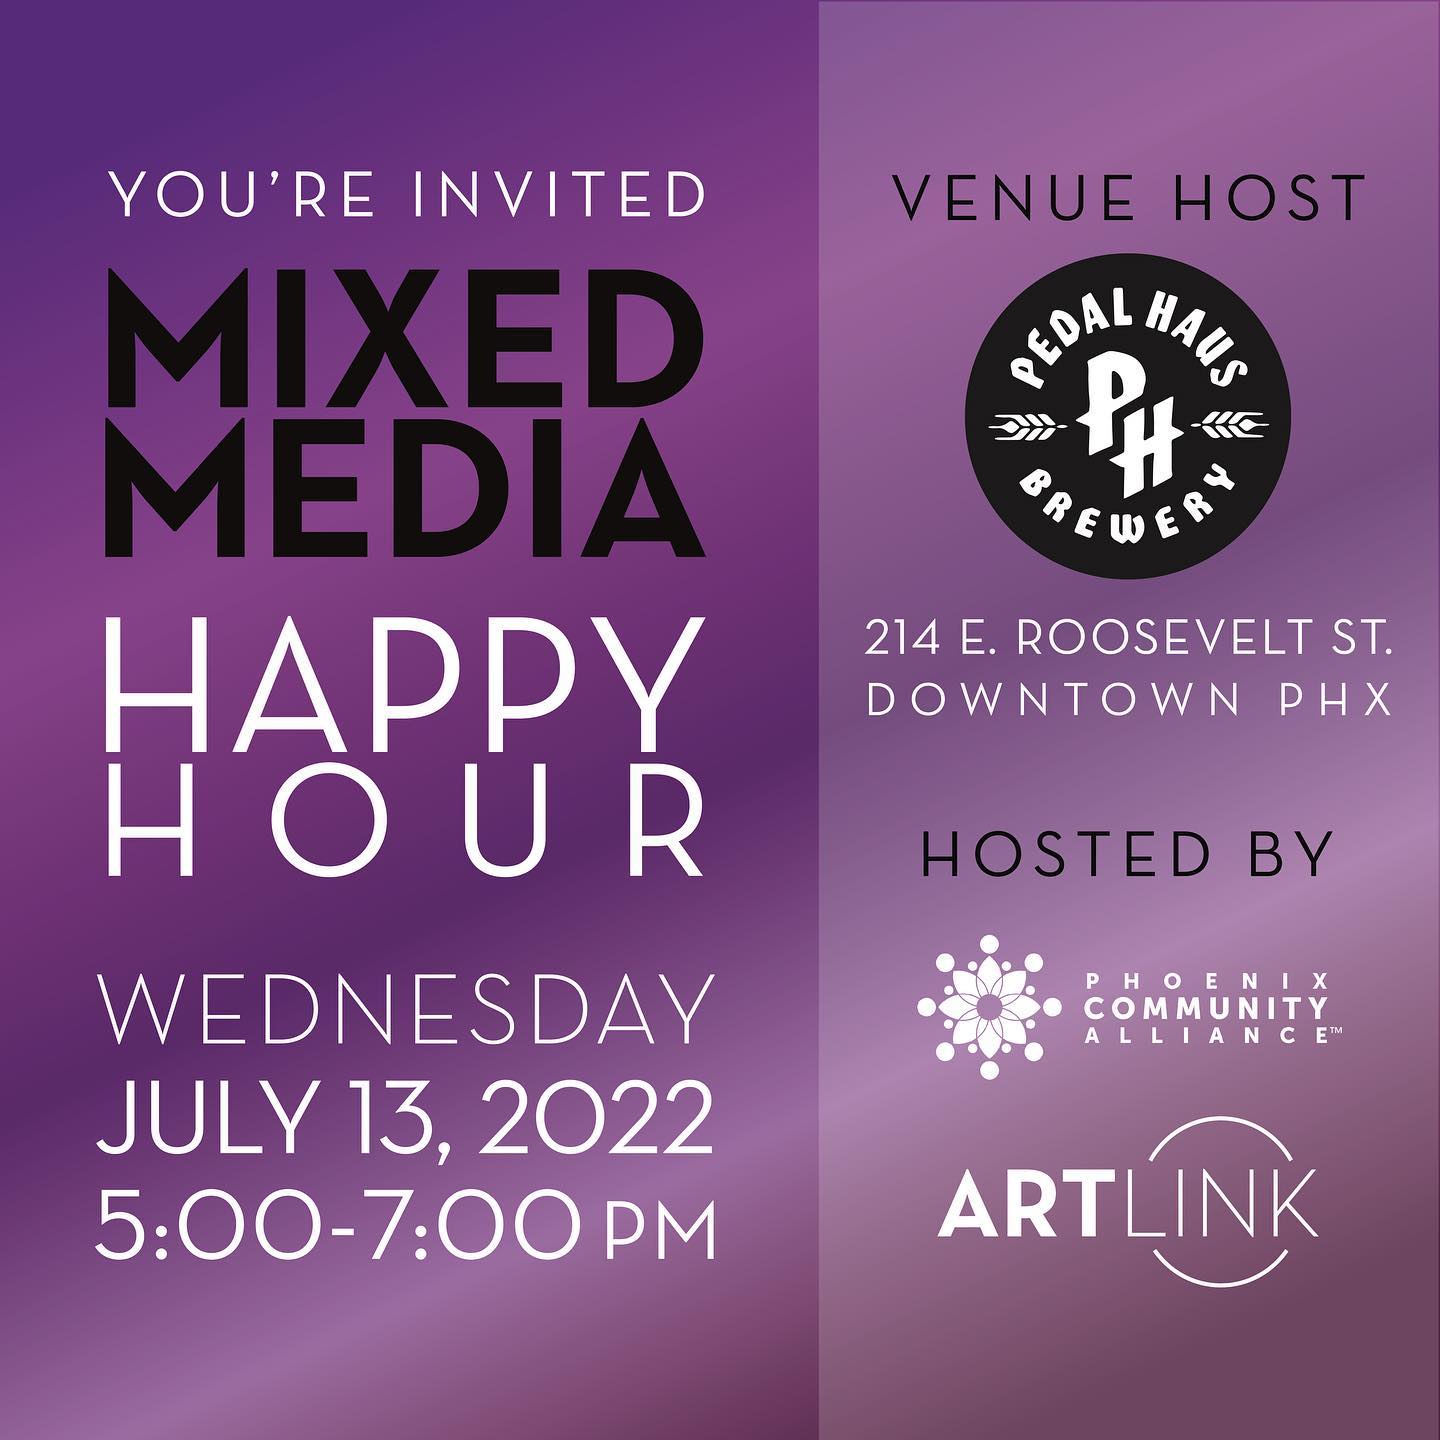 Get ready to Mix & Mingle!

You're invited to join Phoenix Community Alliance and Artlink as we Mix & Mingle with the creative community at Pedal Haus in the Roosevelt Row Arts District and Evans Churchill Neighborhood.

Enjoy some sips and bites and learn about the host organizations, their connection with the downtown community, and look ahead to the coming months of arts and culture activity – including Super Bowl LVII, which just announced a multi-day festival to take place in February 2023 in downtown Phoenix's Margaret T. Hance Park!

All community members – including artists, arts advocates and creative businesses – are invited, and if you're not already a PCA member or Artlink Articipant, you'll find it's a fun way to learn about how to get involved in these nonprofit organizations that have helped shape our city.

You won't want to miss this one!

We thank Pedal Haus for their "Hauspitality." 

#artlinkphx #phoenixcommunityalliance #dtphx #dtphxinc #pedalhausbrewery